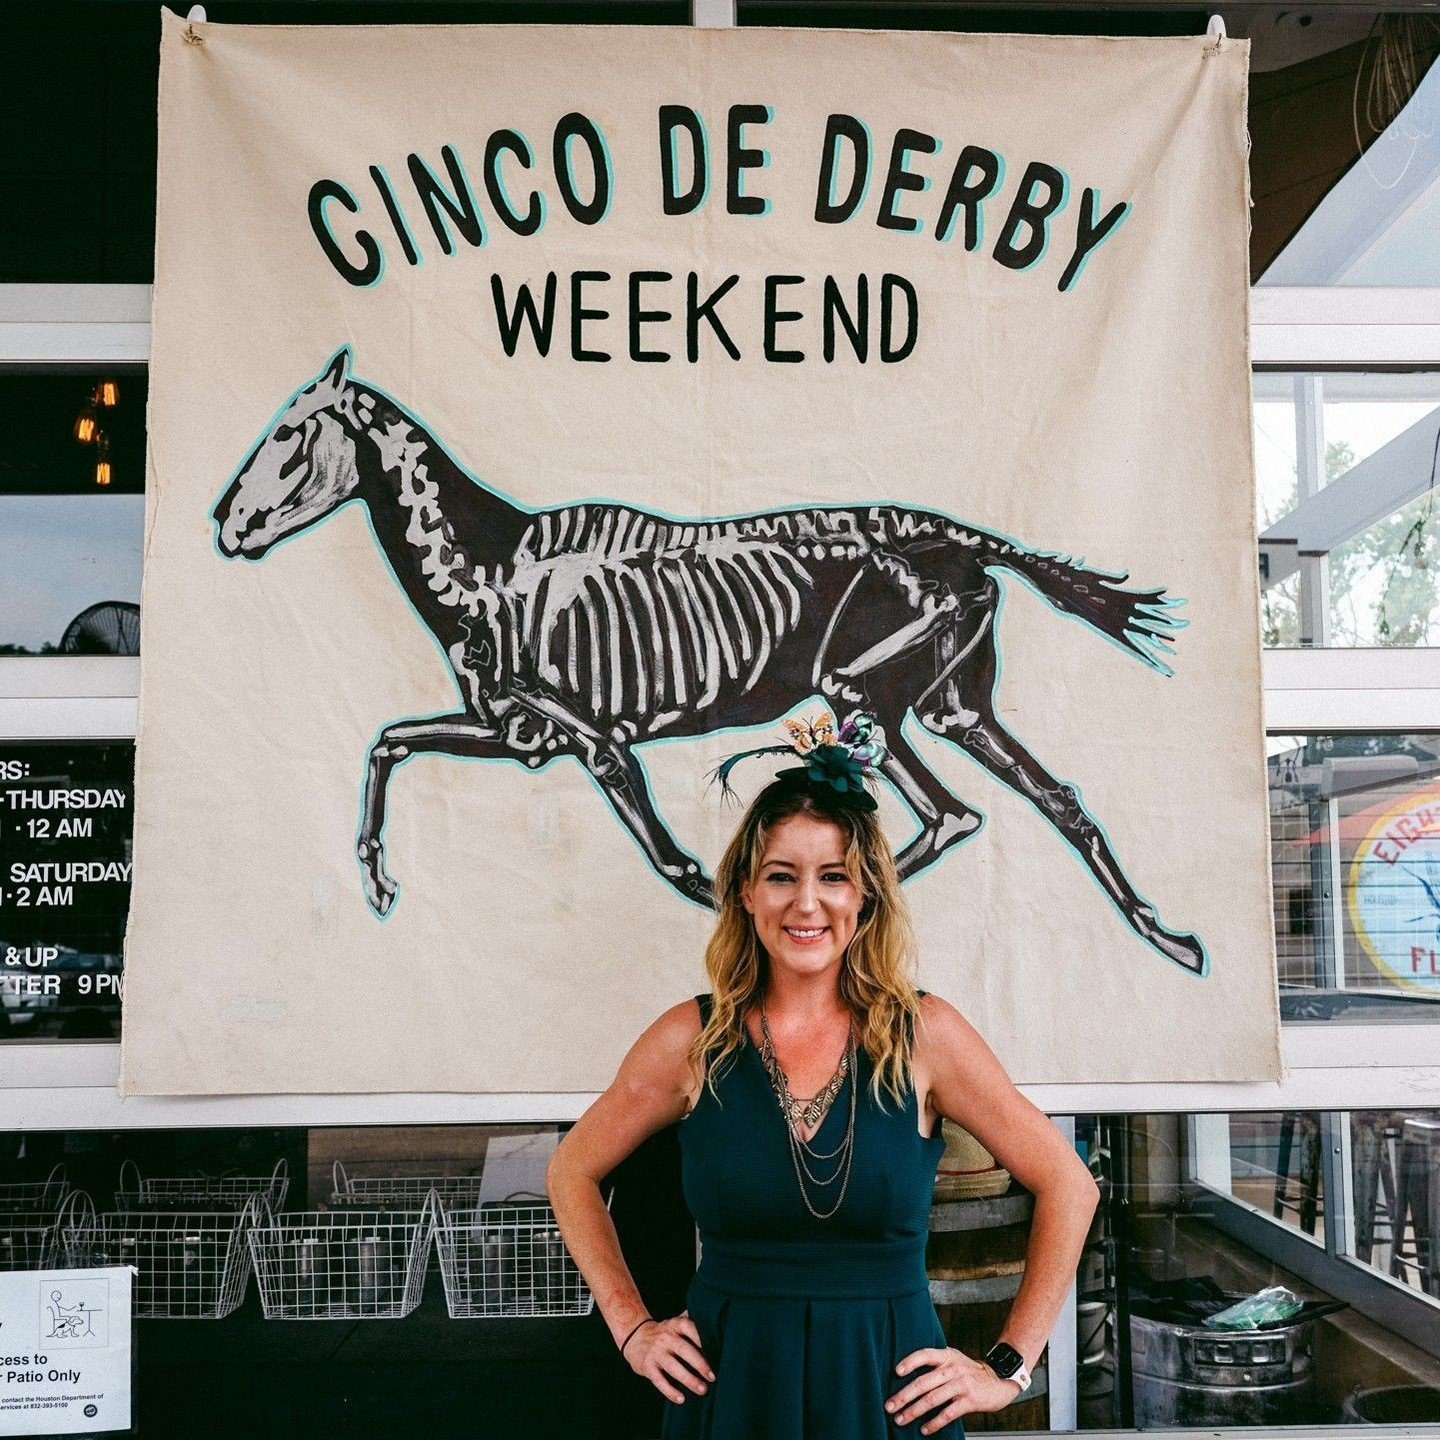 Cinco de Derby weekend is upon us and you already know we're gonna bring the party. 🎉⁠ We'll have a big tent set up to save you from the heat, plus drink specials and more. ⁠
⁠
Derby Day with @beamsuntory - Saturday, May 4⁠
▪️ Juelp + Derby-inspired